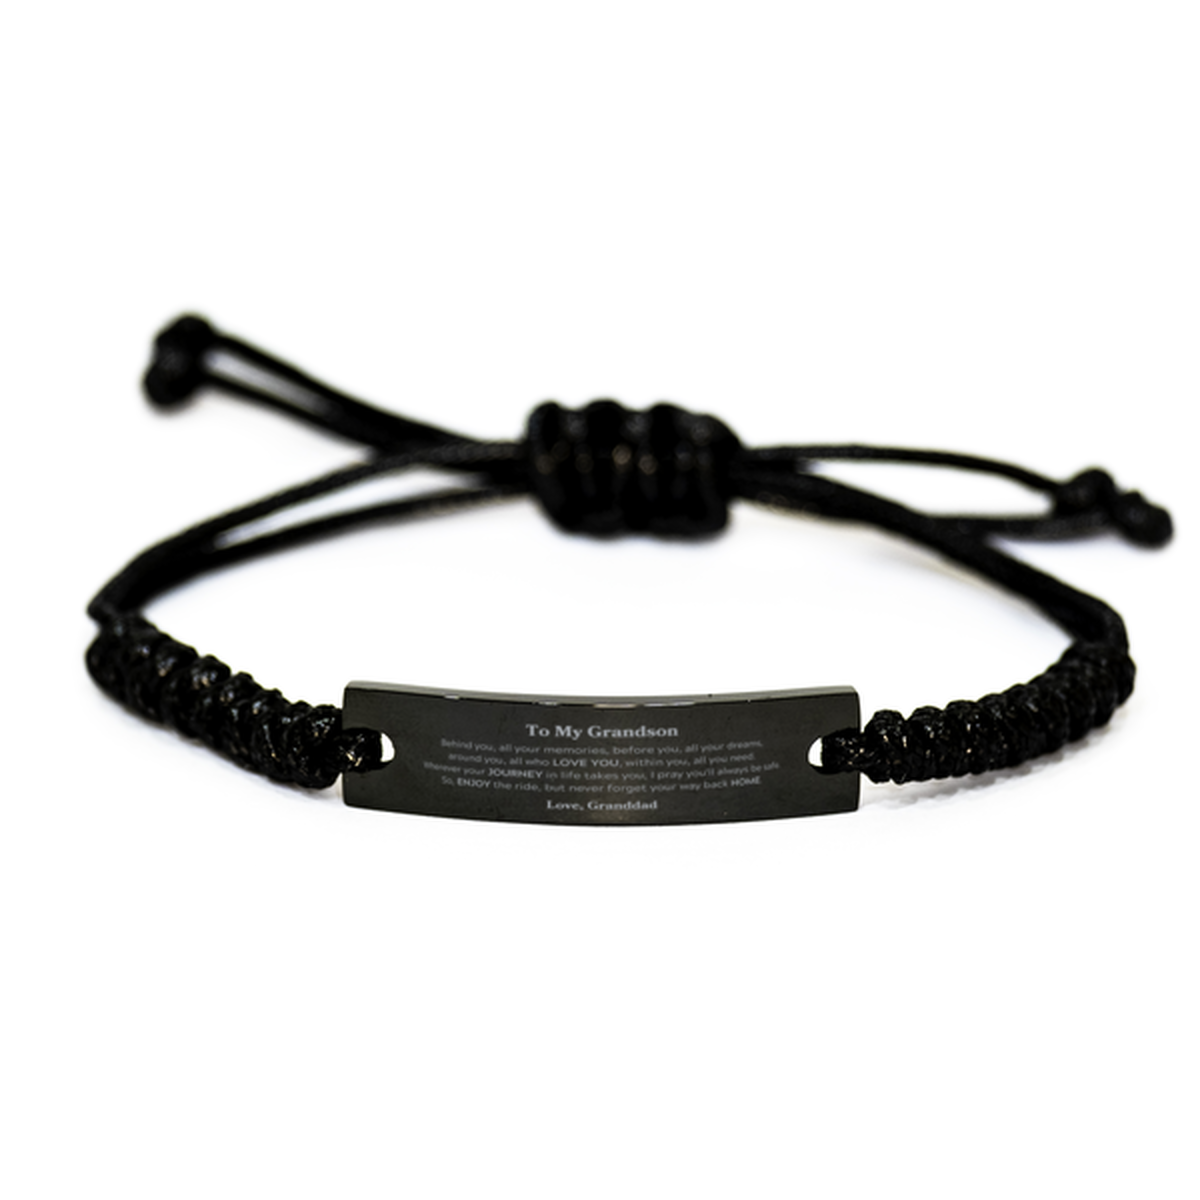 To My Grandson Graduation Gifts from Granddad, Grandson Black Rope Bracelet Christmas Birthday Gifts for Grandson Behind you, all your memories, before you, all your dreams. Love, Granddad